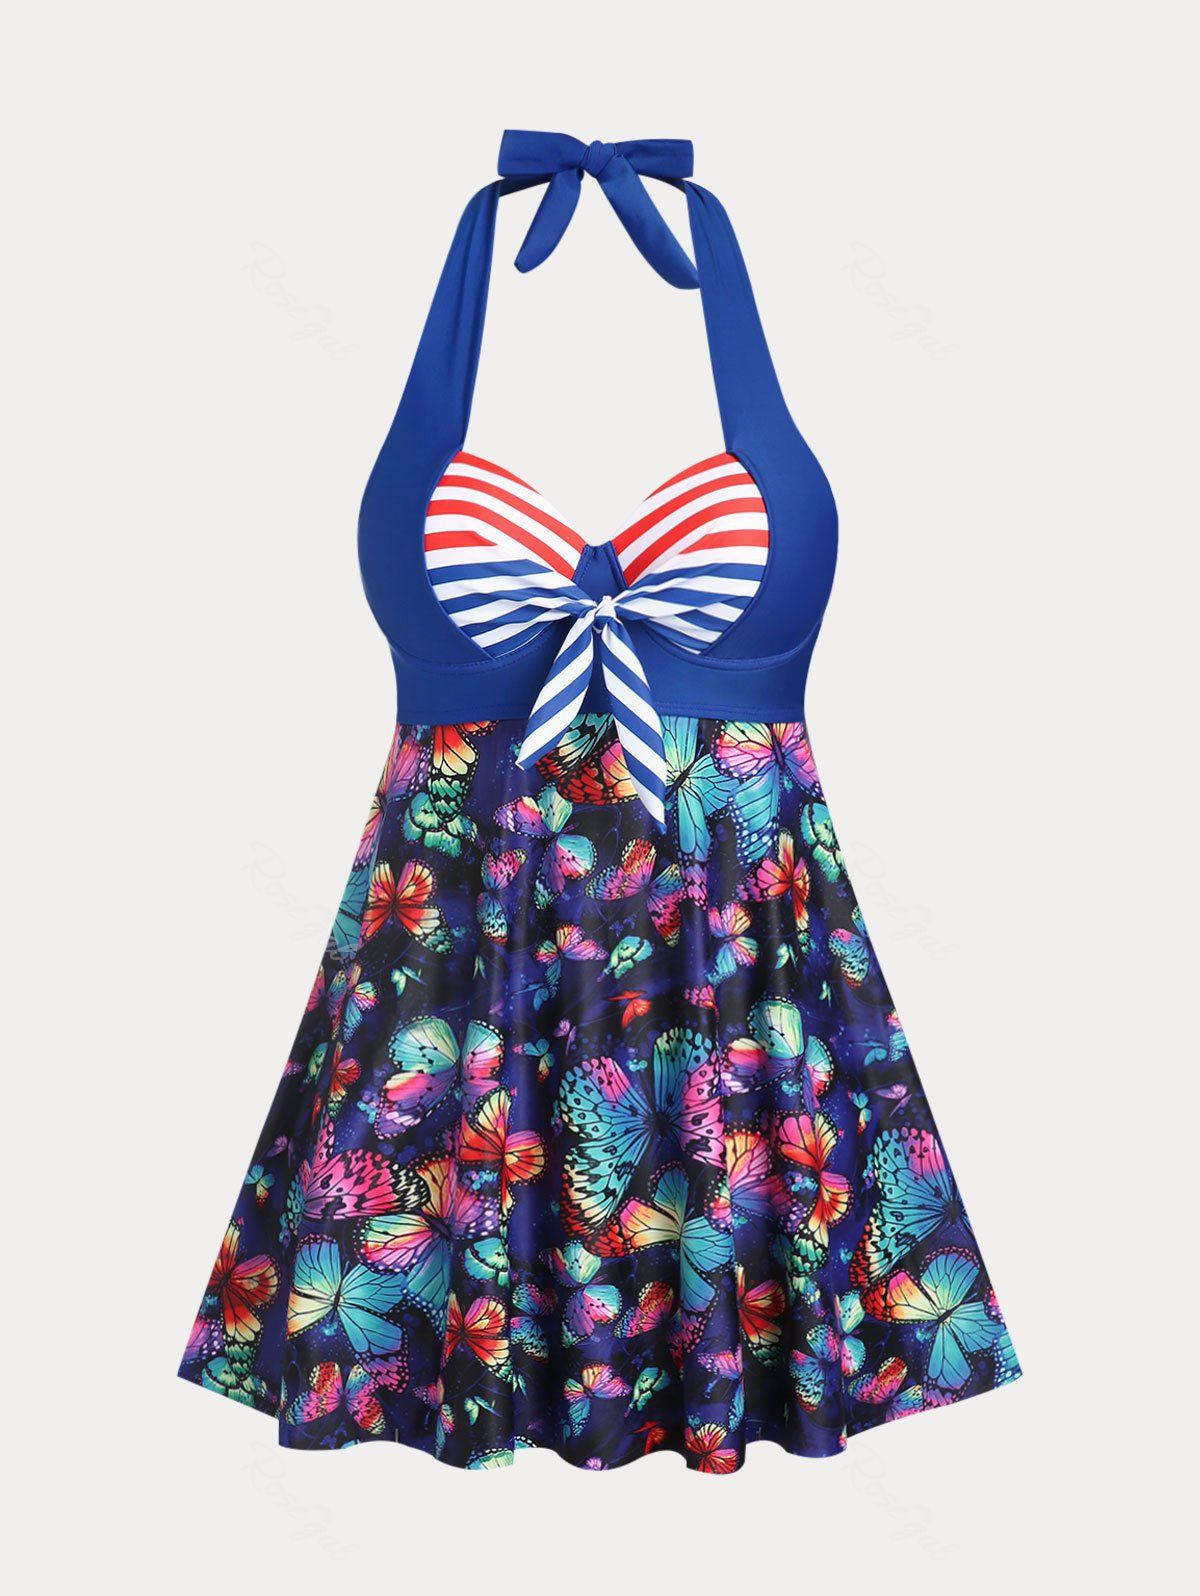 Fashion Plus Size & Curve Halter Underwire Butterfly Print High Waist Tankini Swimsuit  